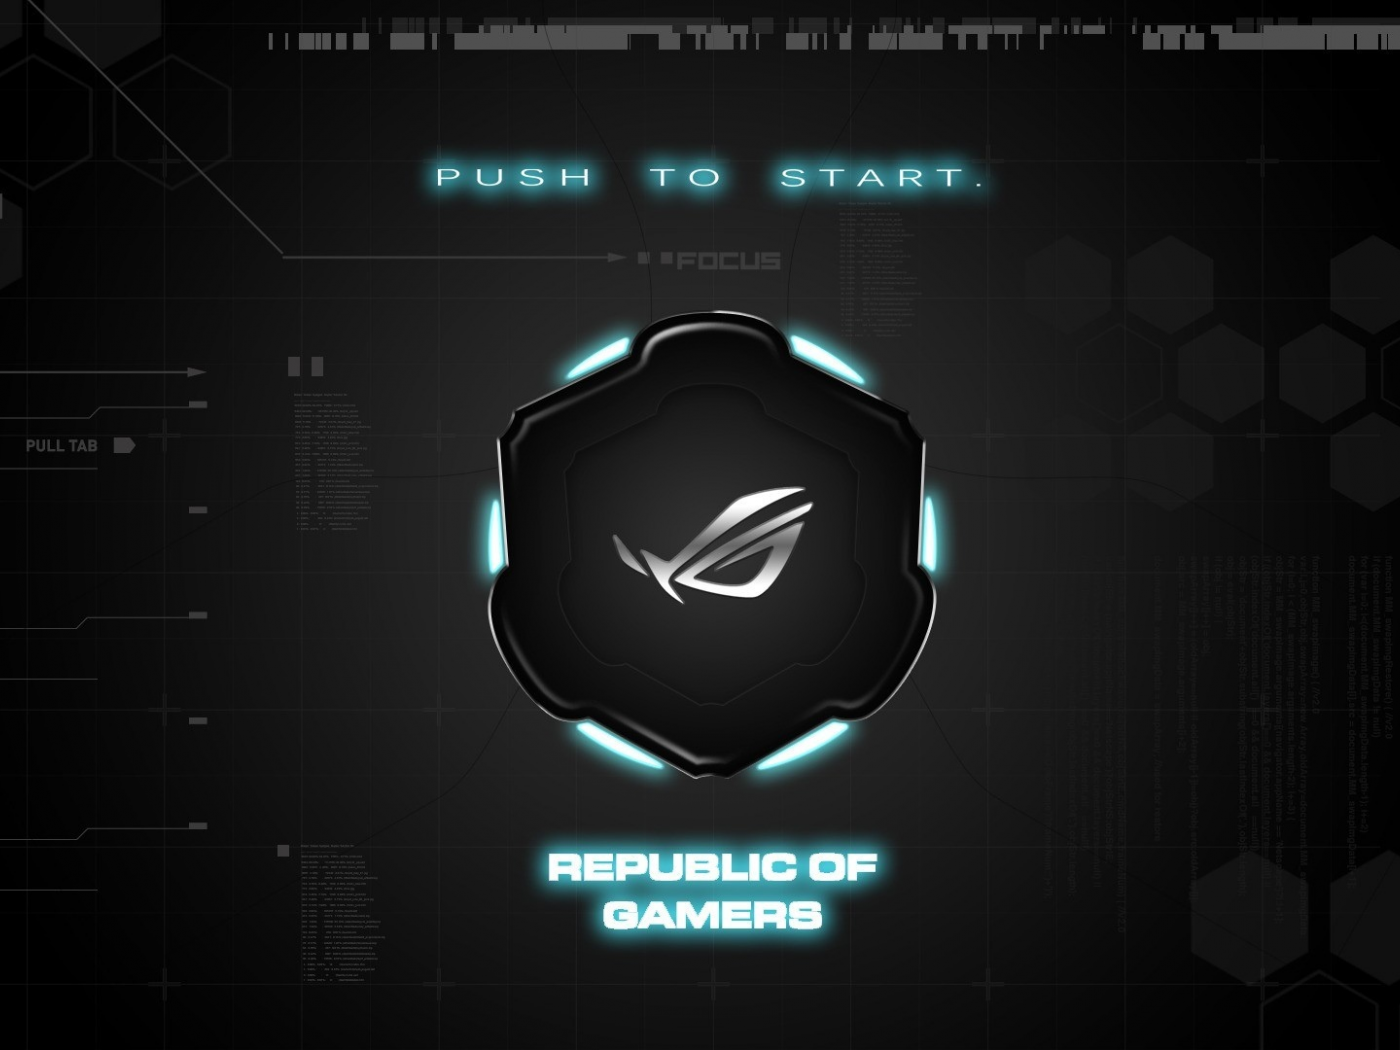 Asus, background, brand, republic of gamers, push to start, rog